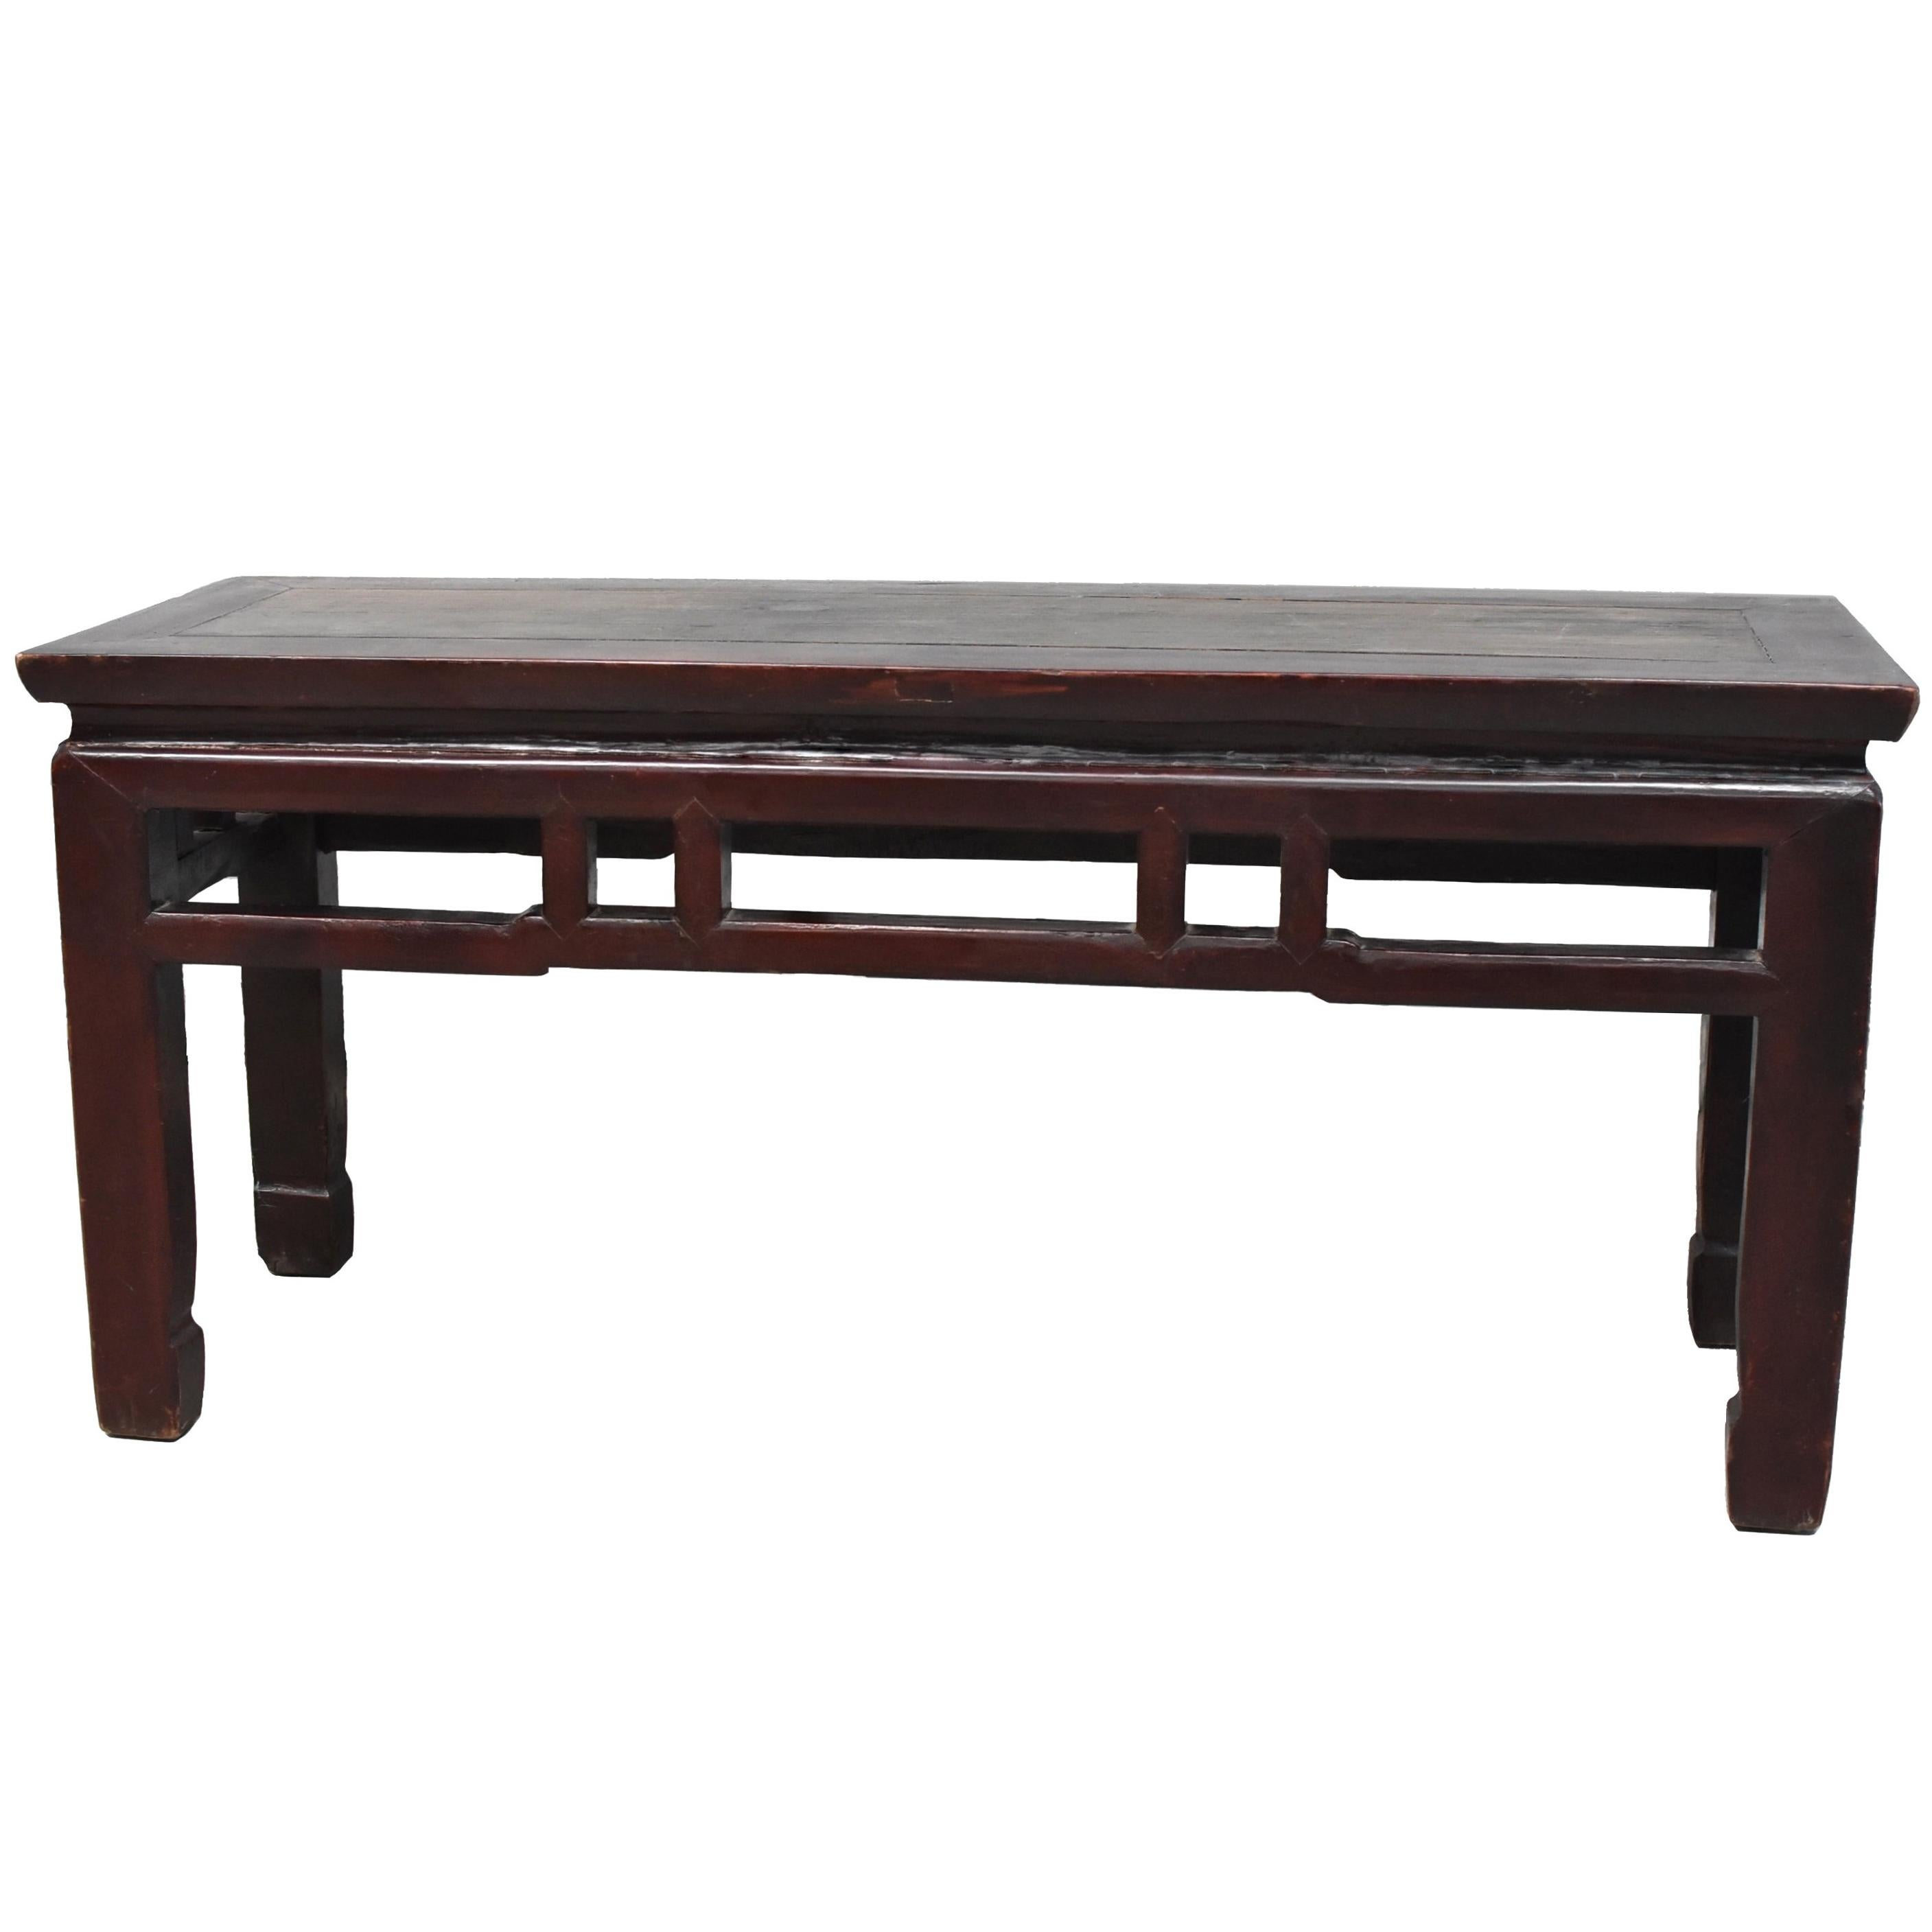 Chinese Antique Solid Wood Bench, Ming Style Spring Bench